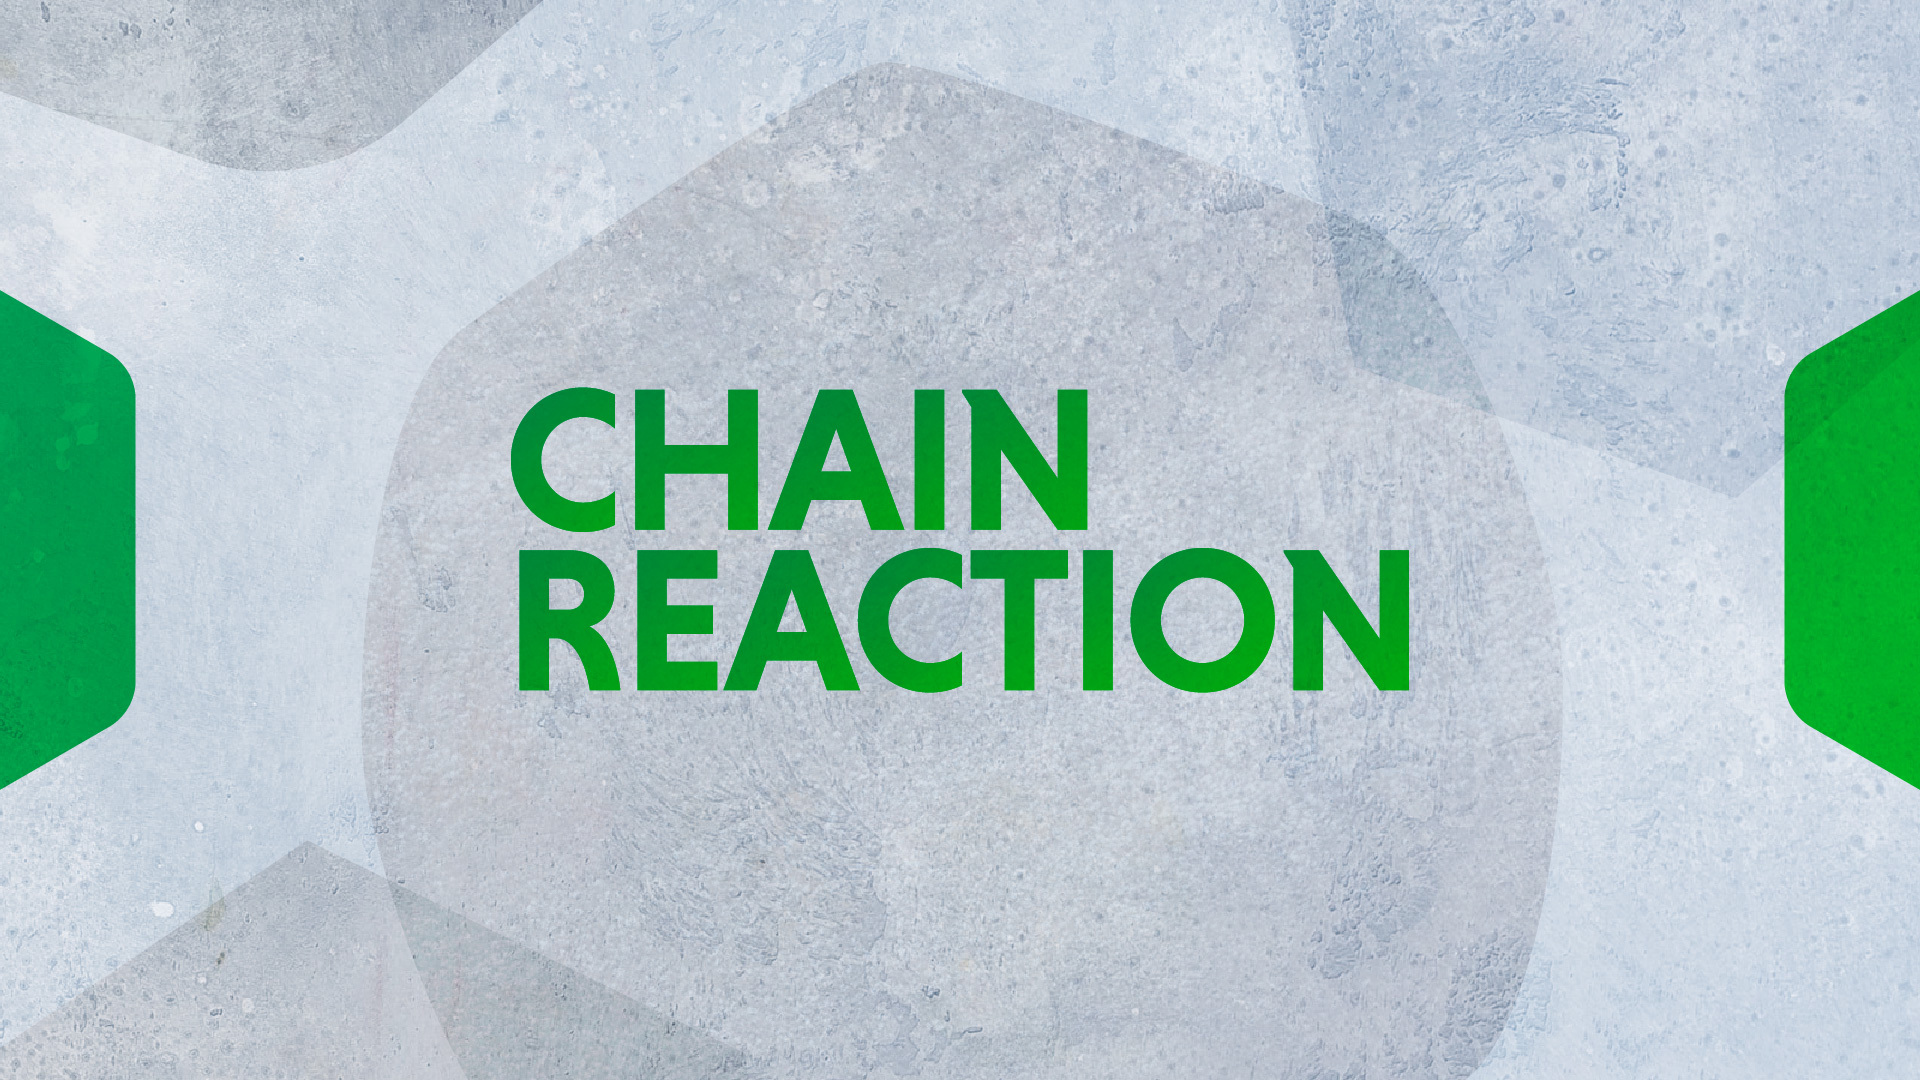 TechCrunch’s crypto&focused podcast Chain Reaction is nominated for a Webby Award